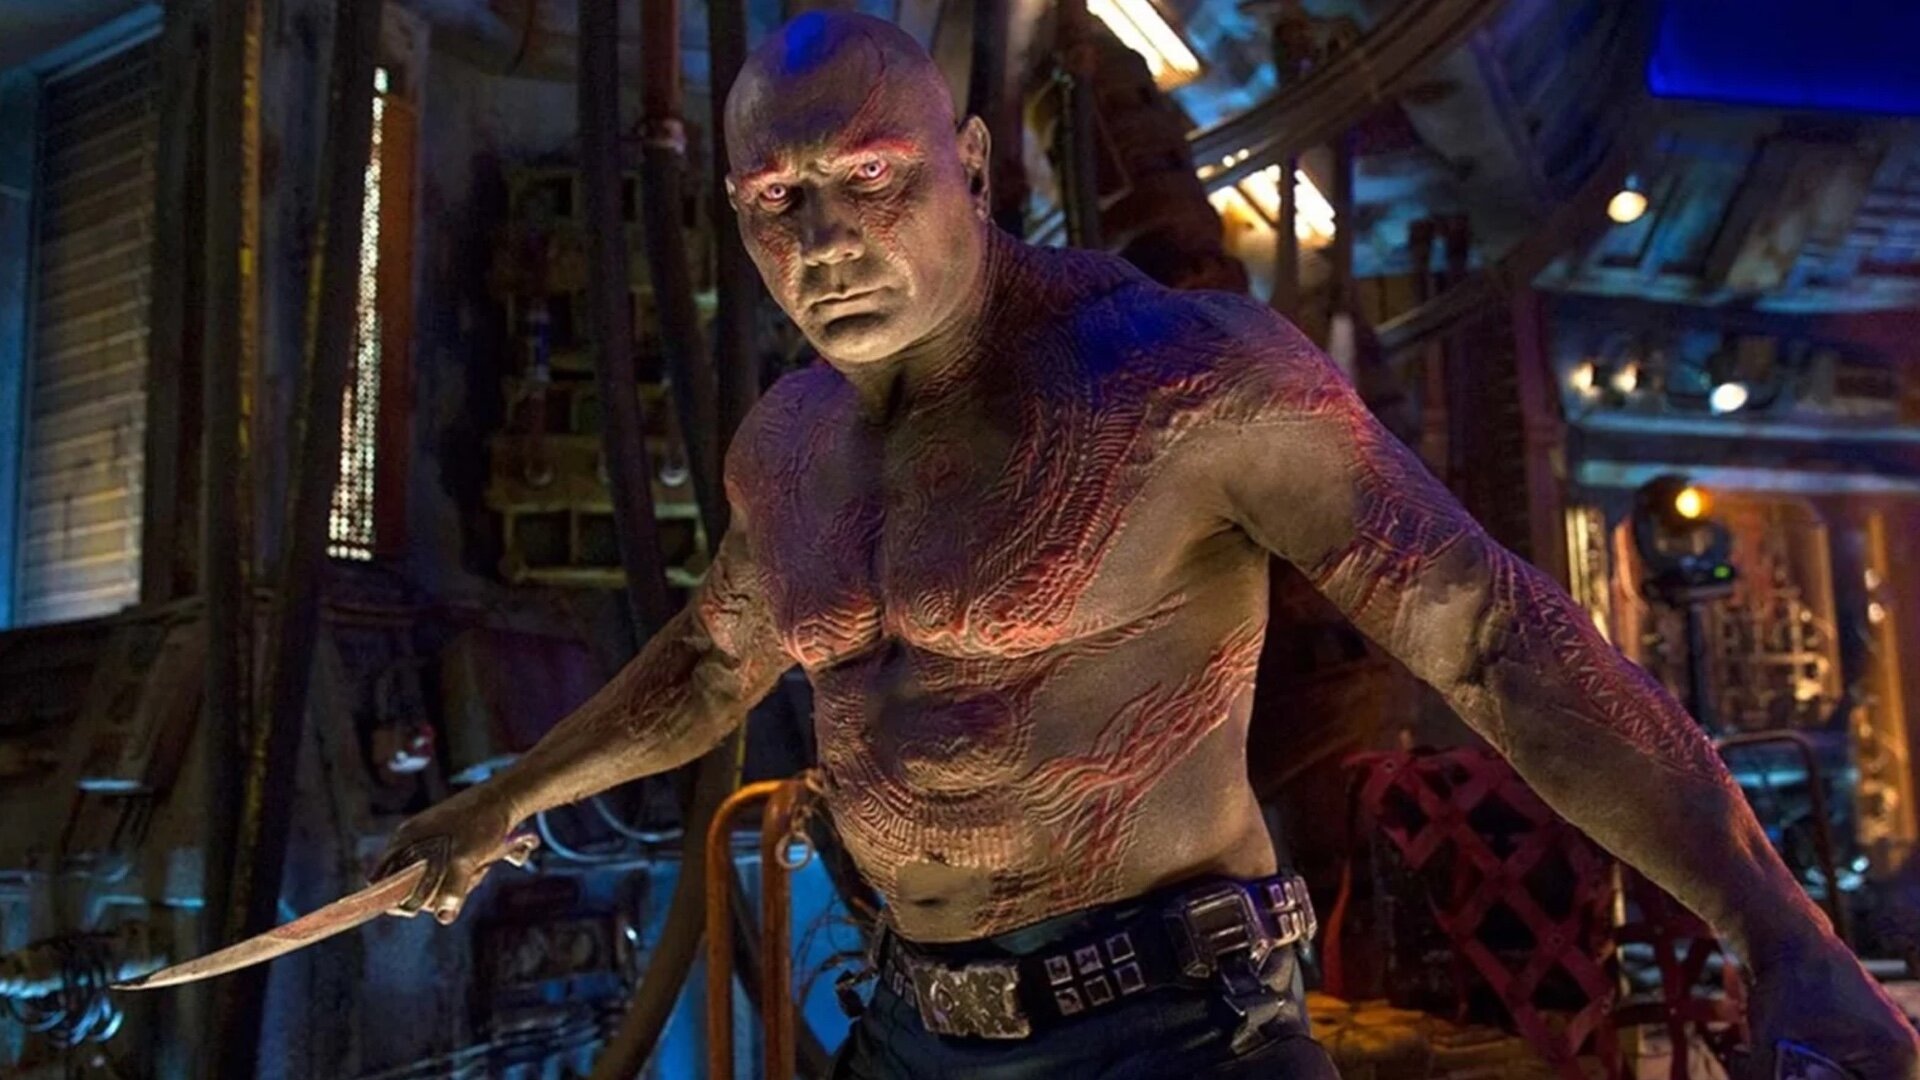 TIL Drax the Destroyer is portrayed by Dave Bautista, who is of